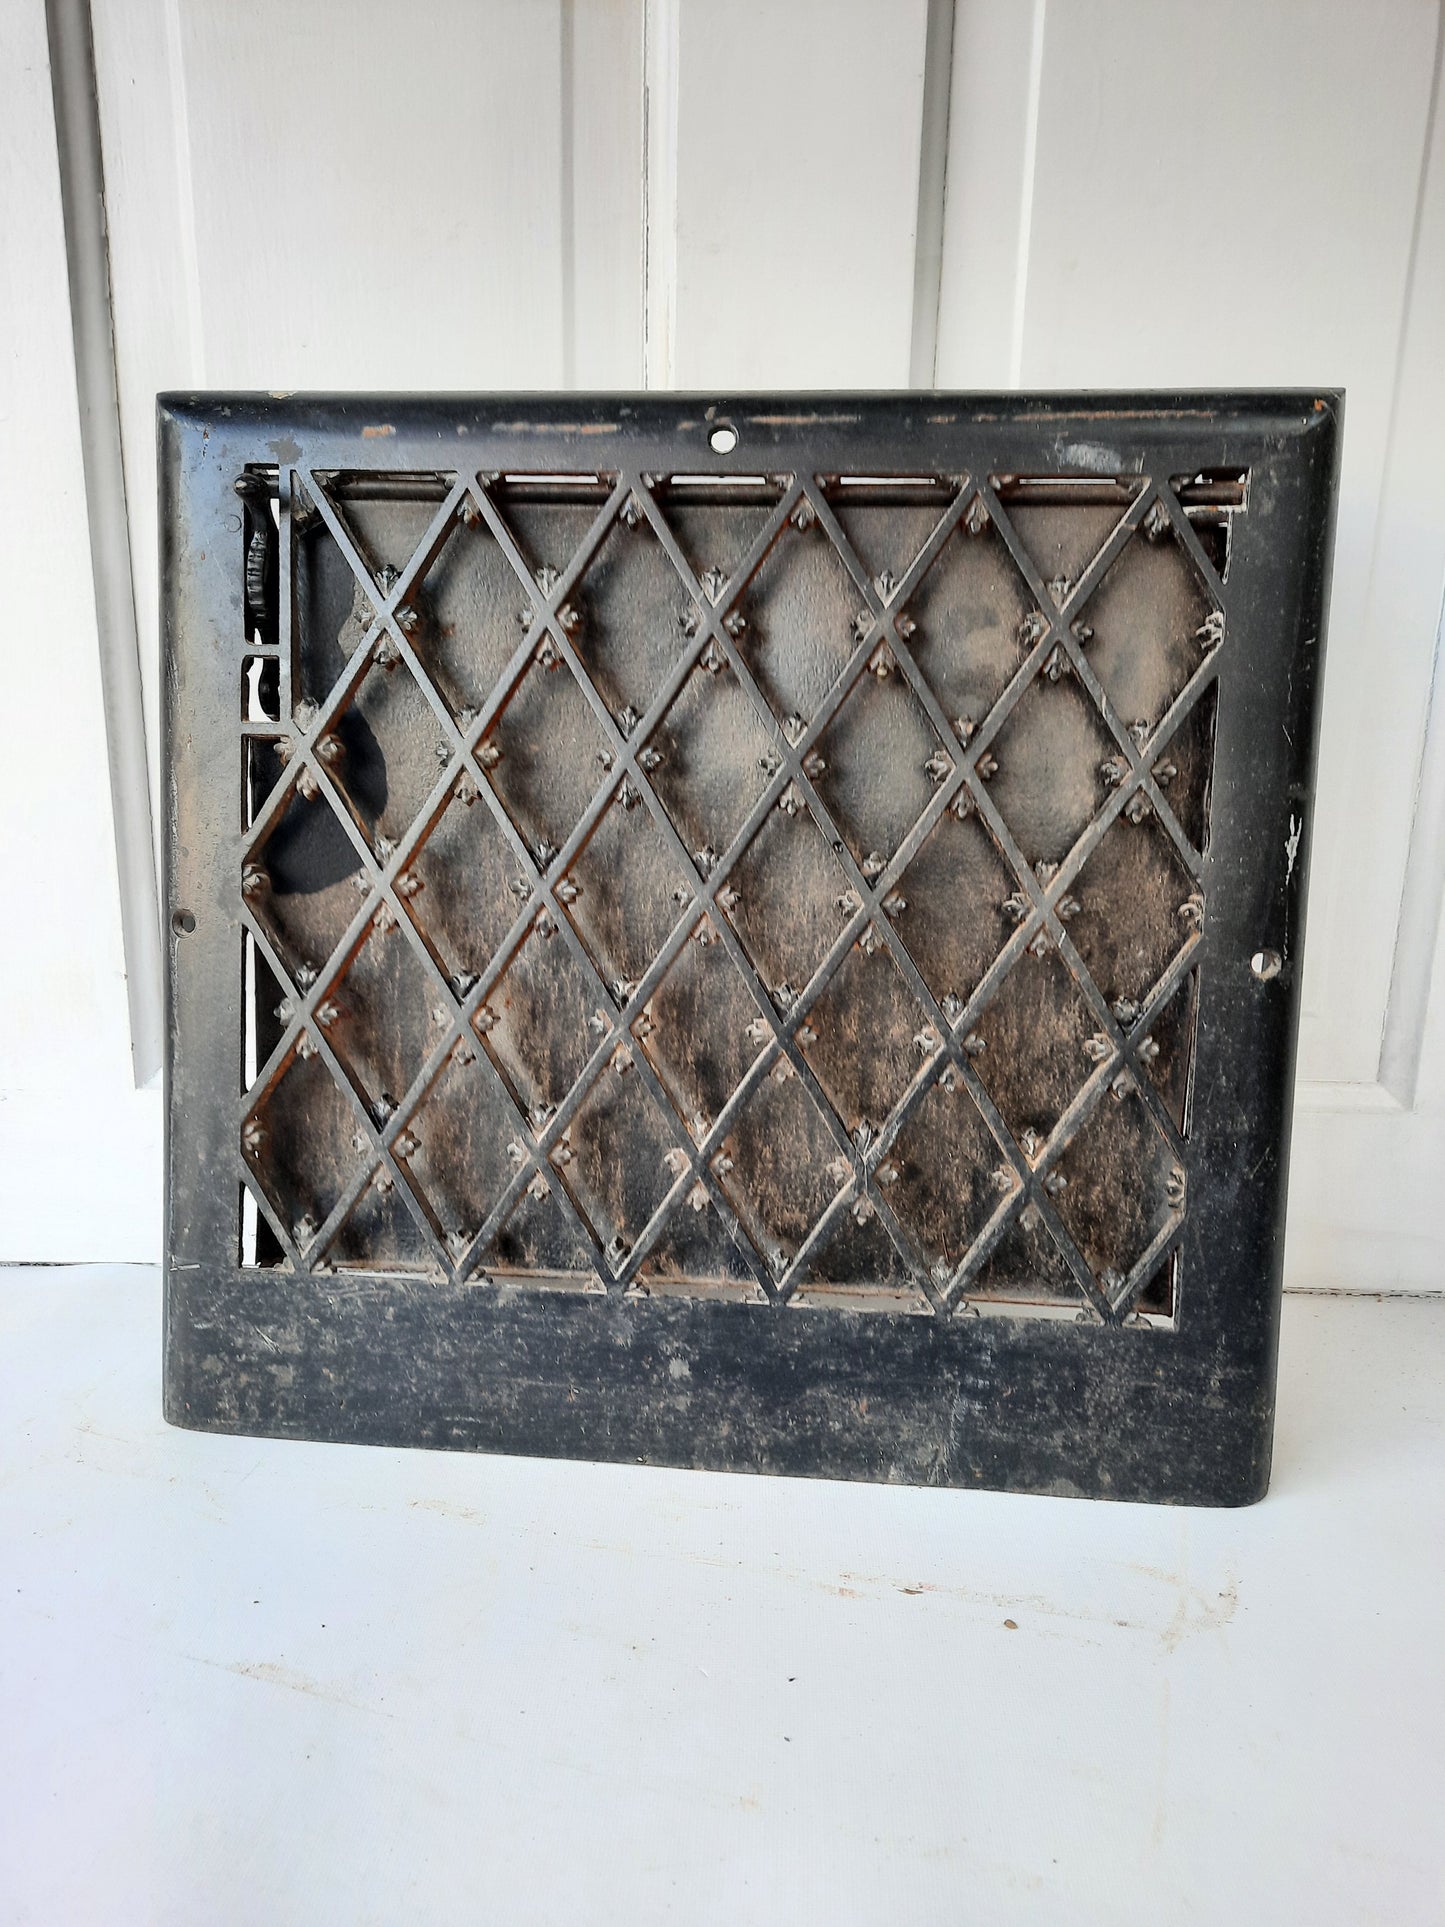 15 x 17 Antique Cast Iron Baseboard Vent, Antique Iron Angled Wall Vent Cover 121903